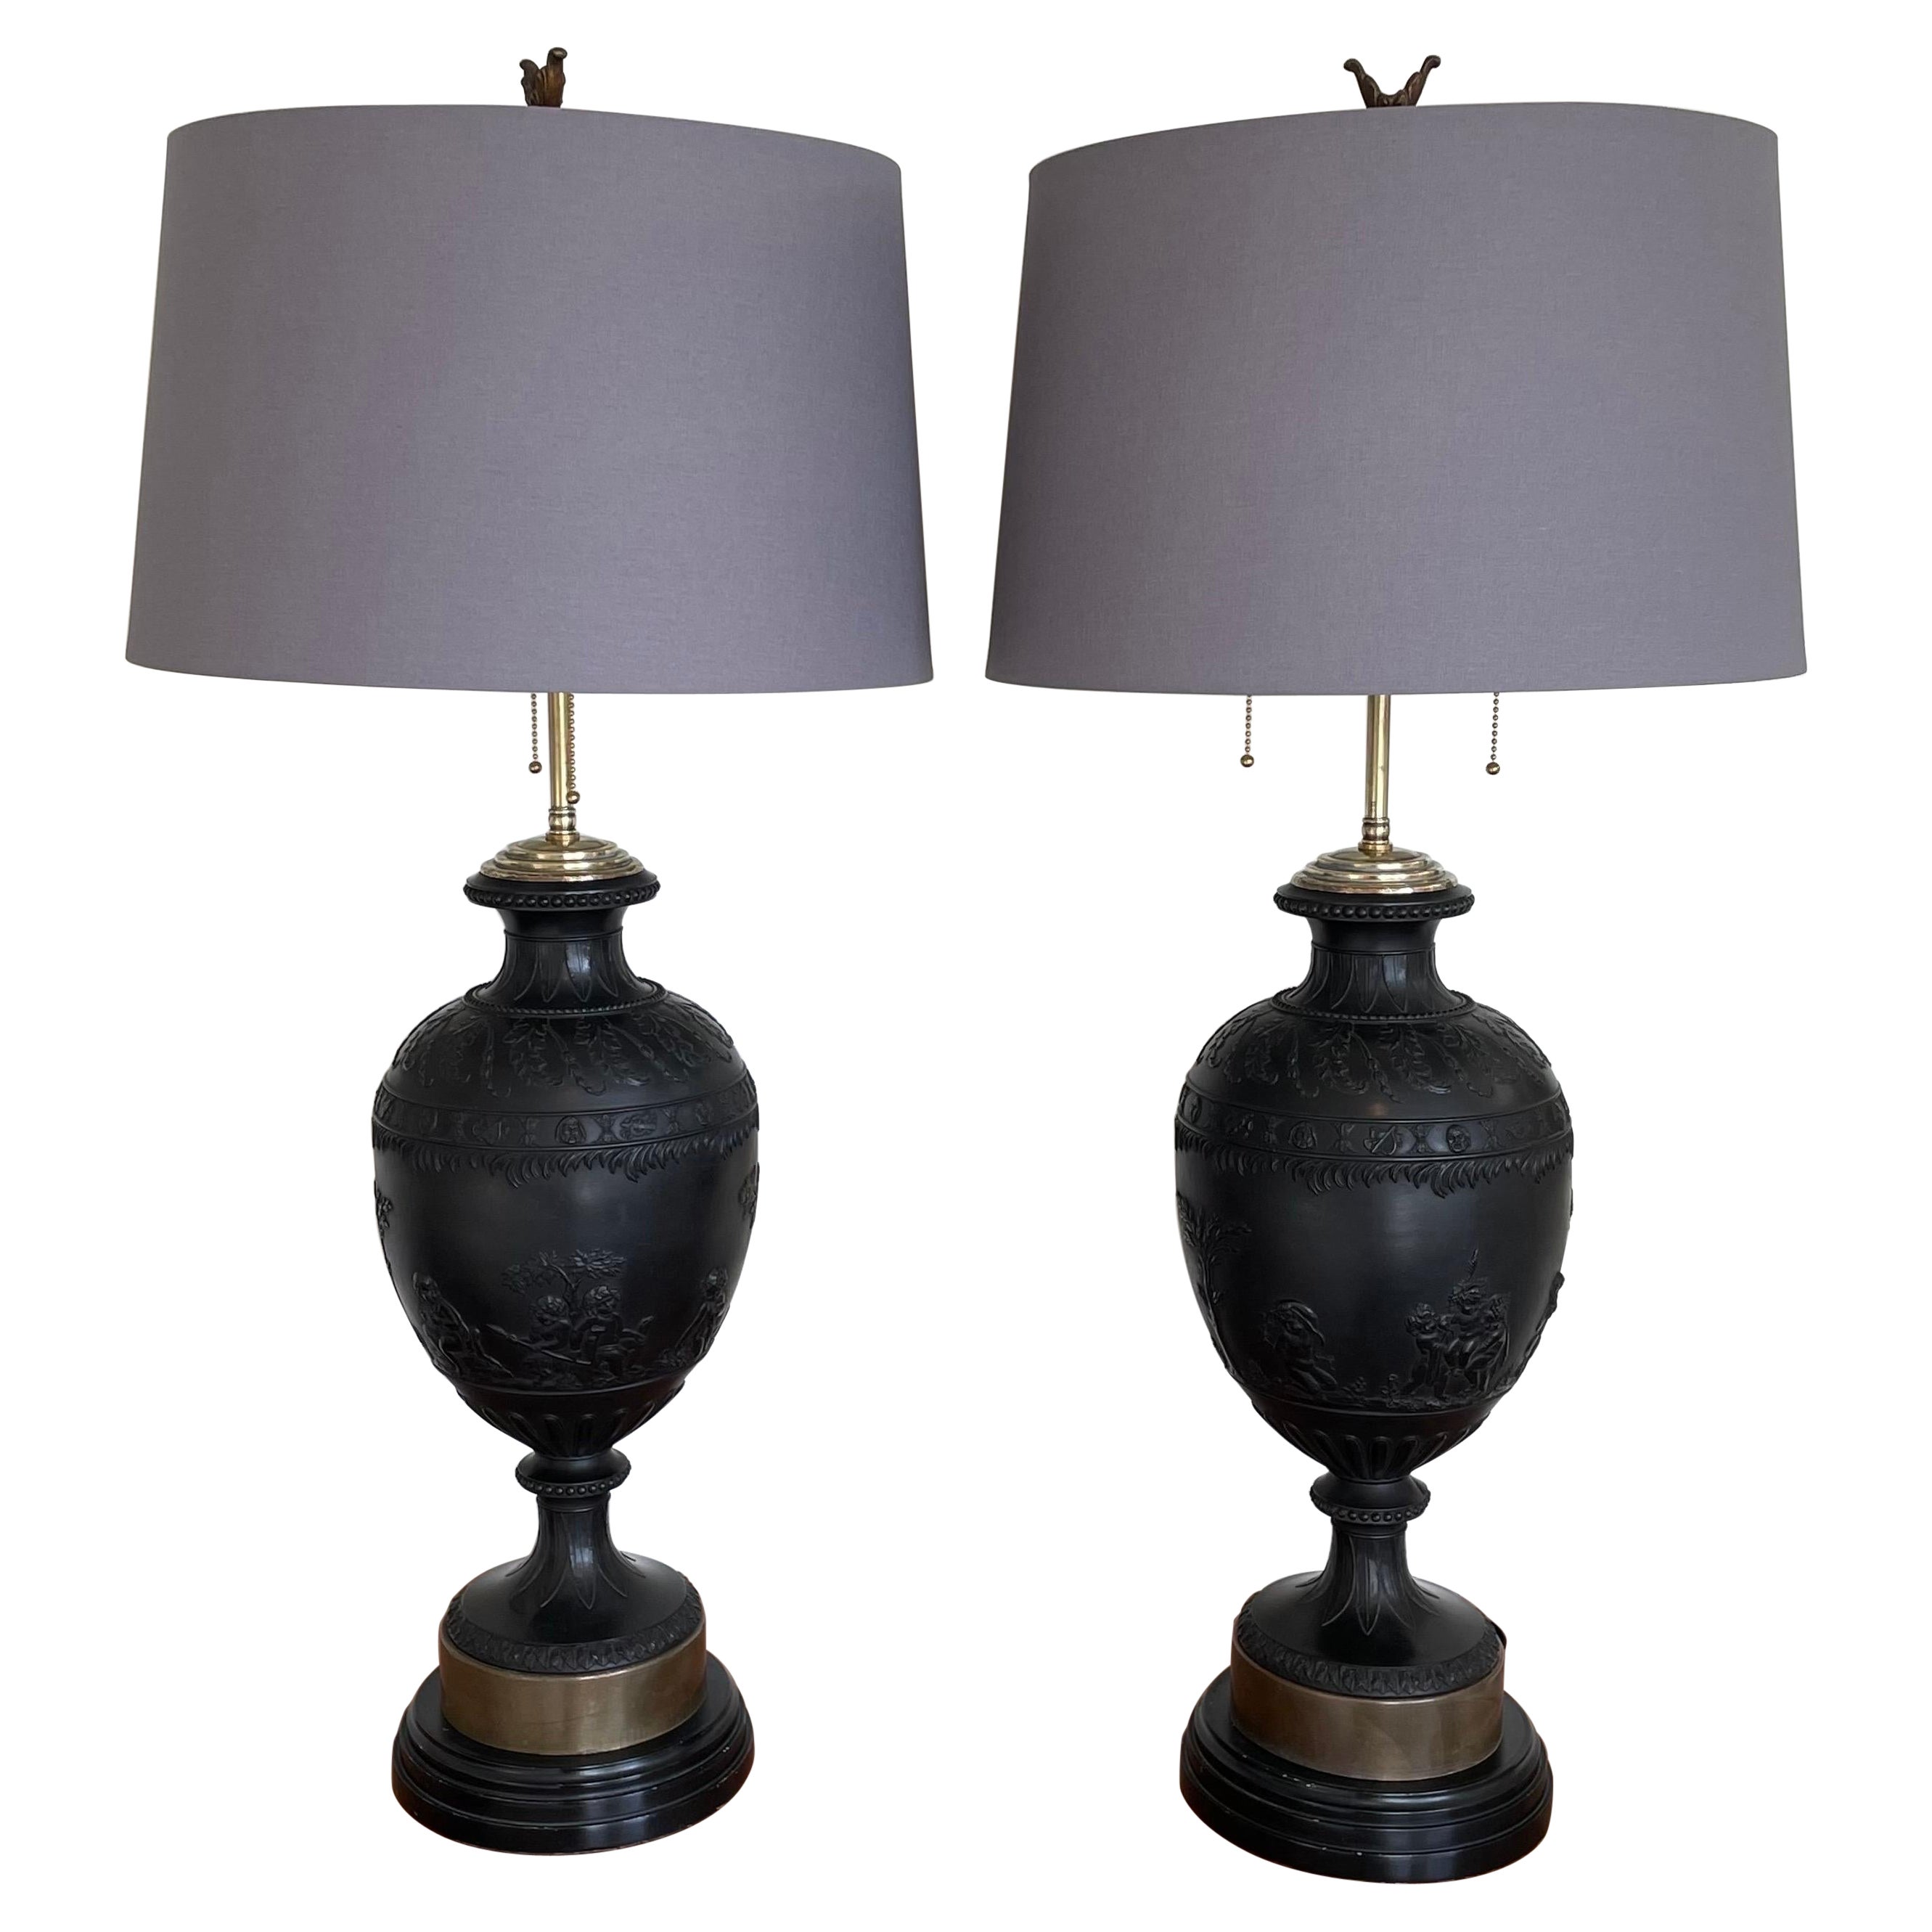 Monumental Pair of Black Basalt Table Lamps by Wedgwood, Late 19th Century